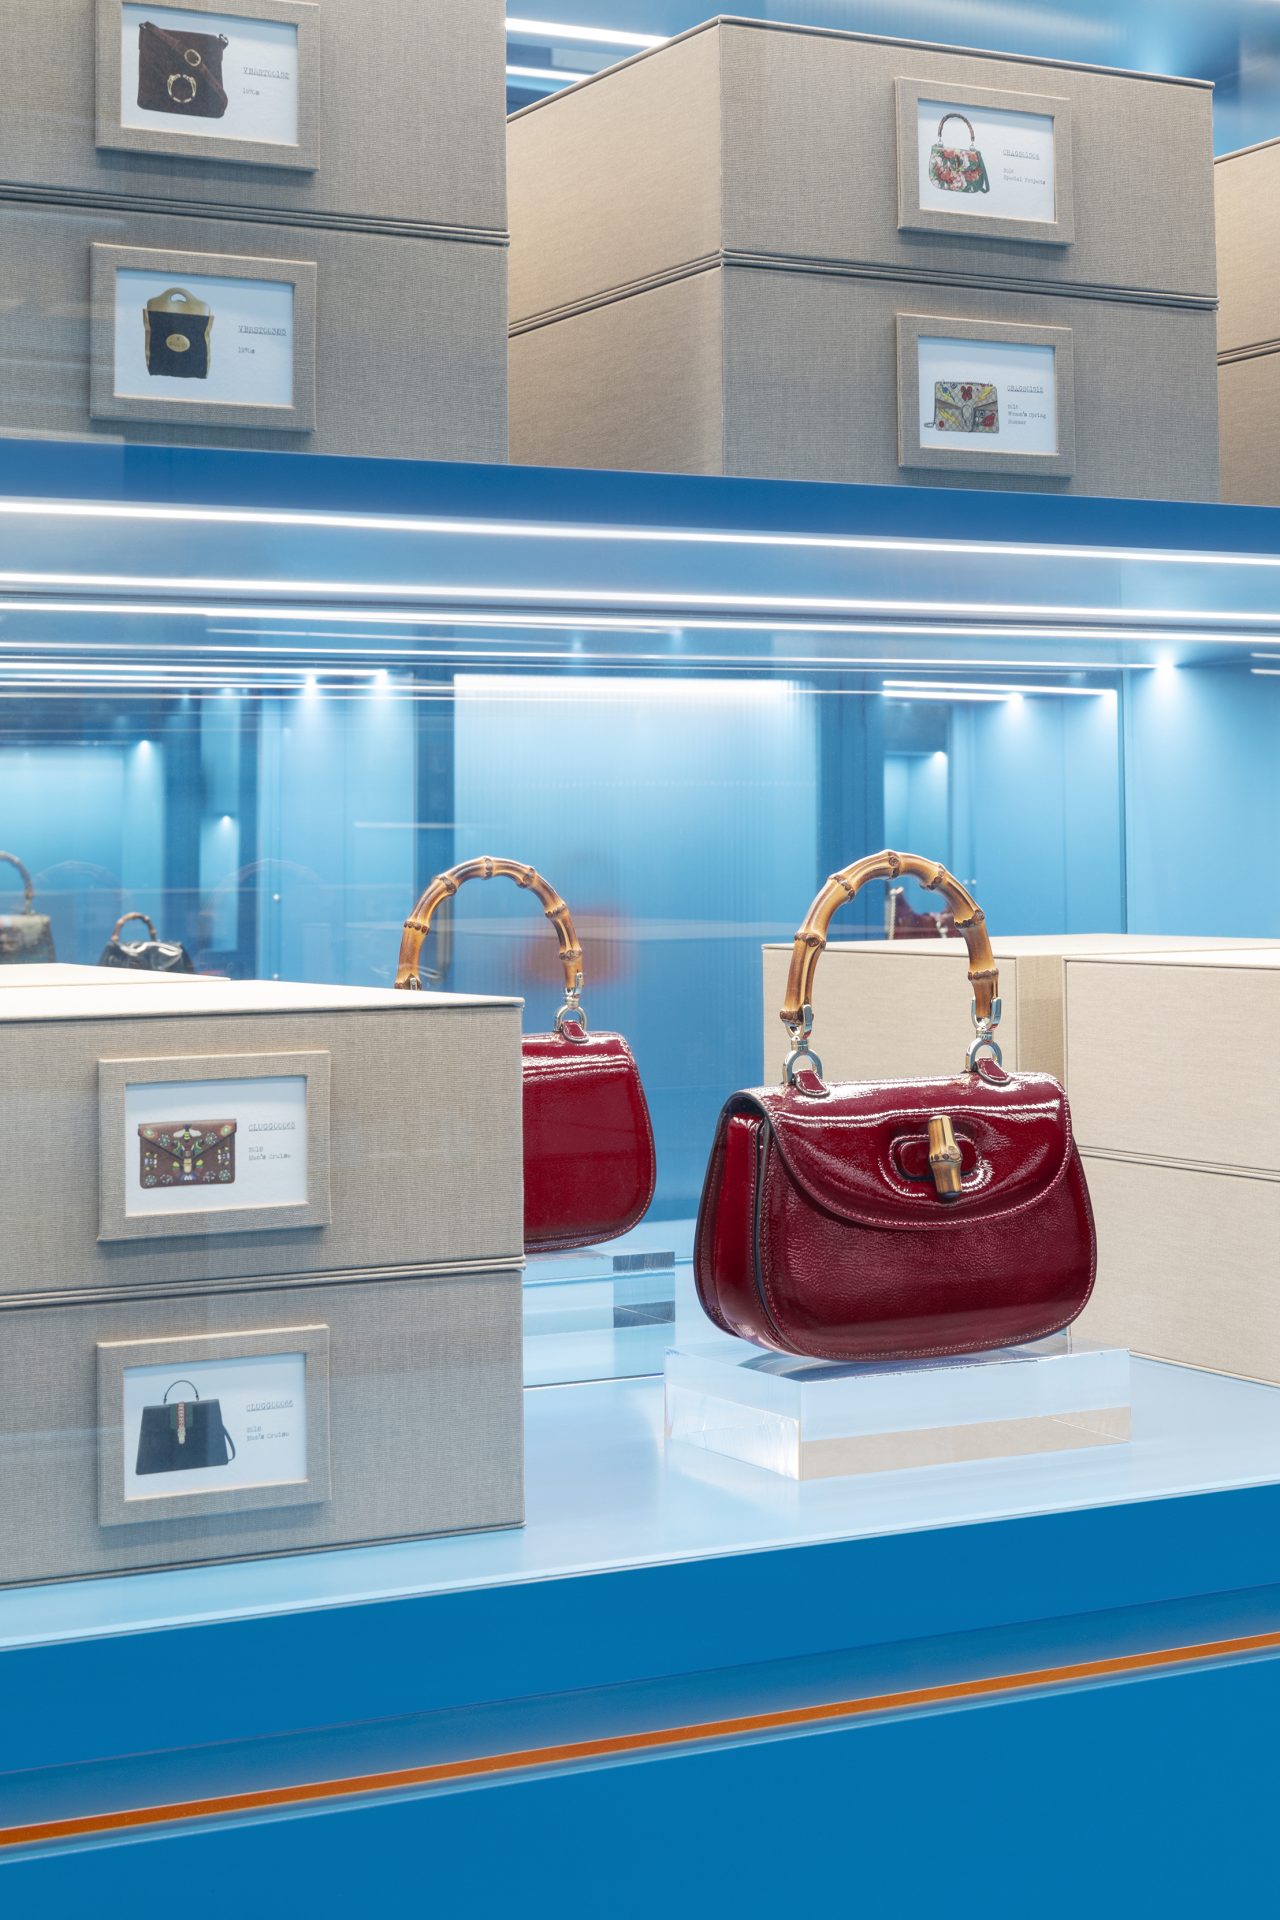 Louis Vuitton travelling fashion exhibition has arrived in Australia